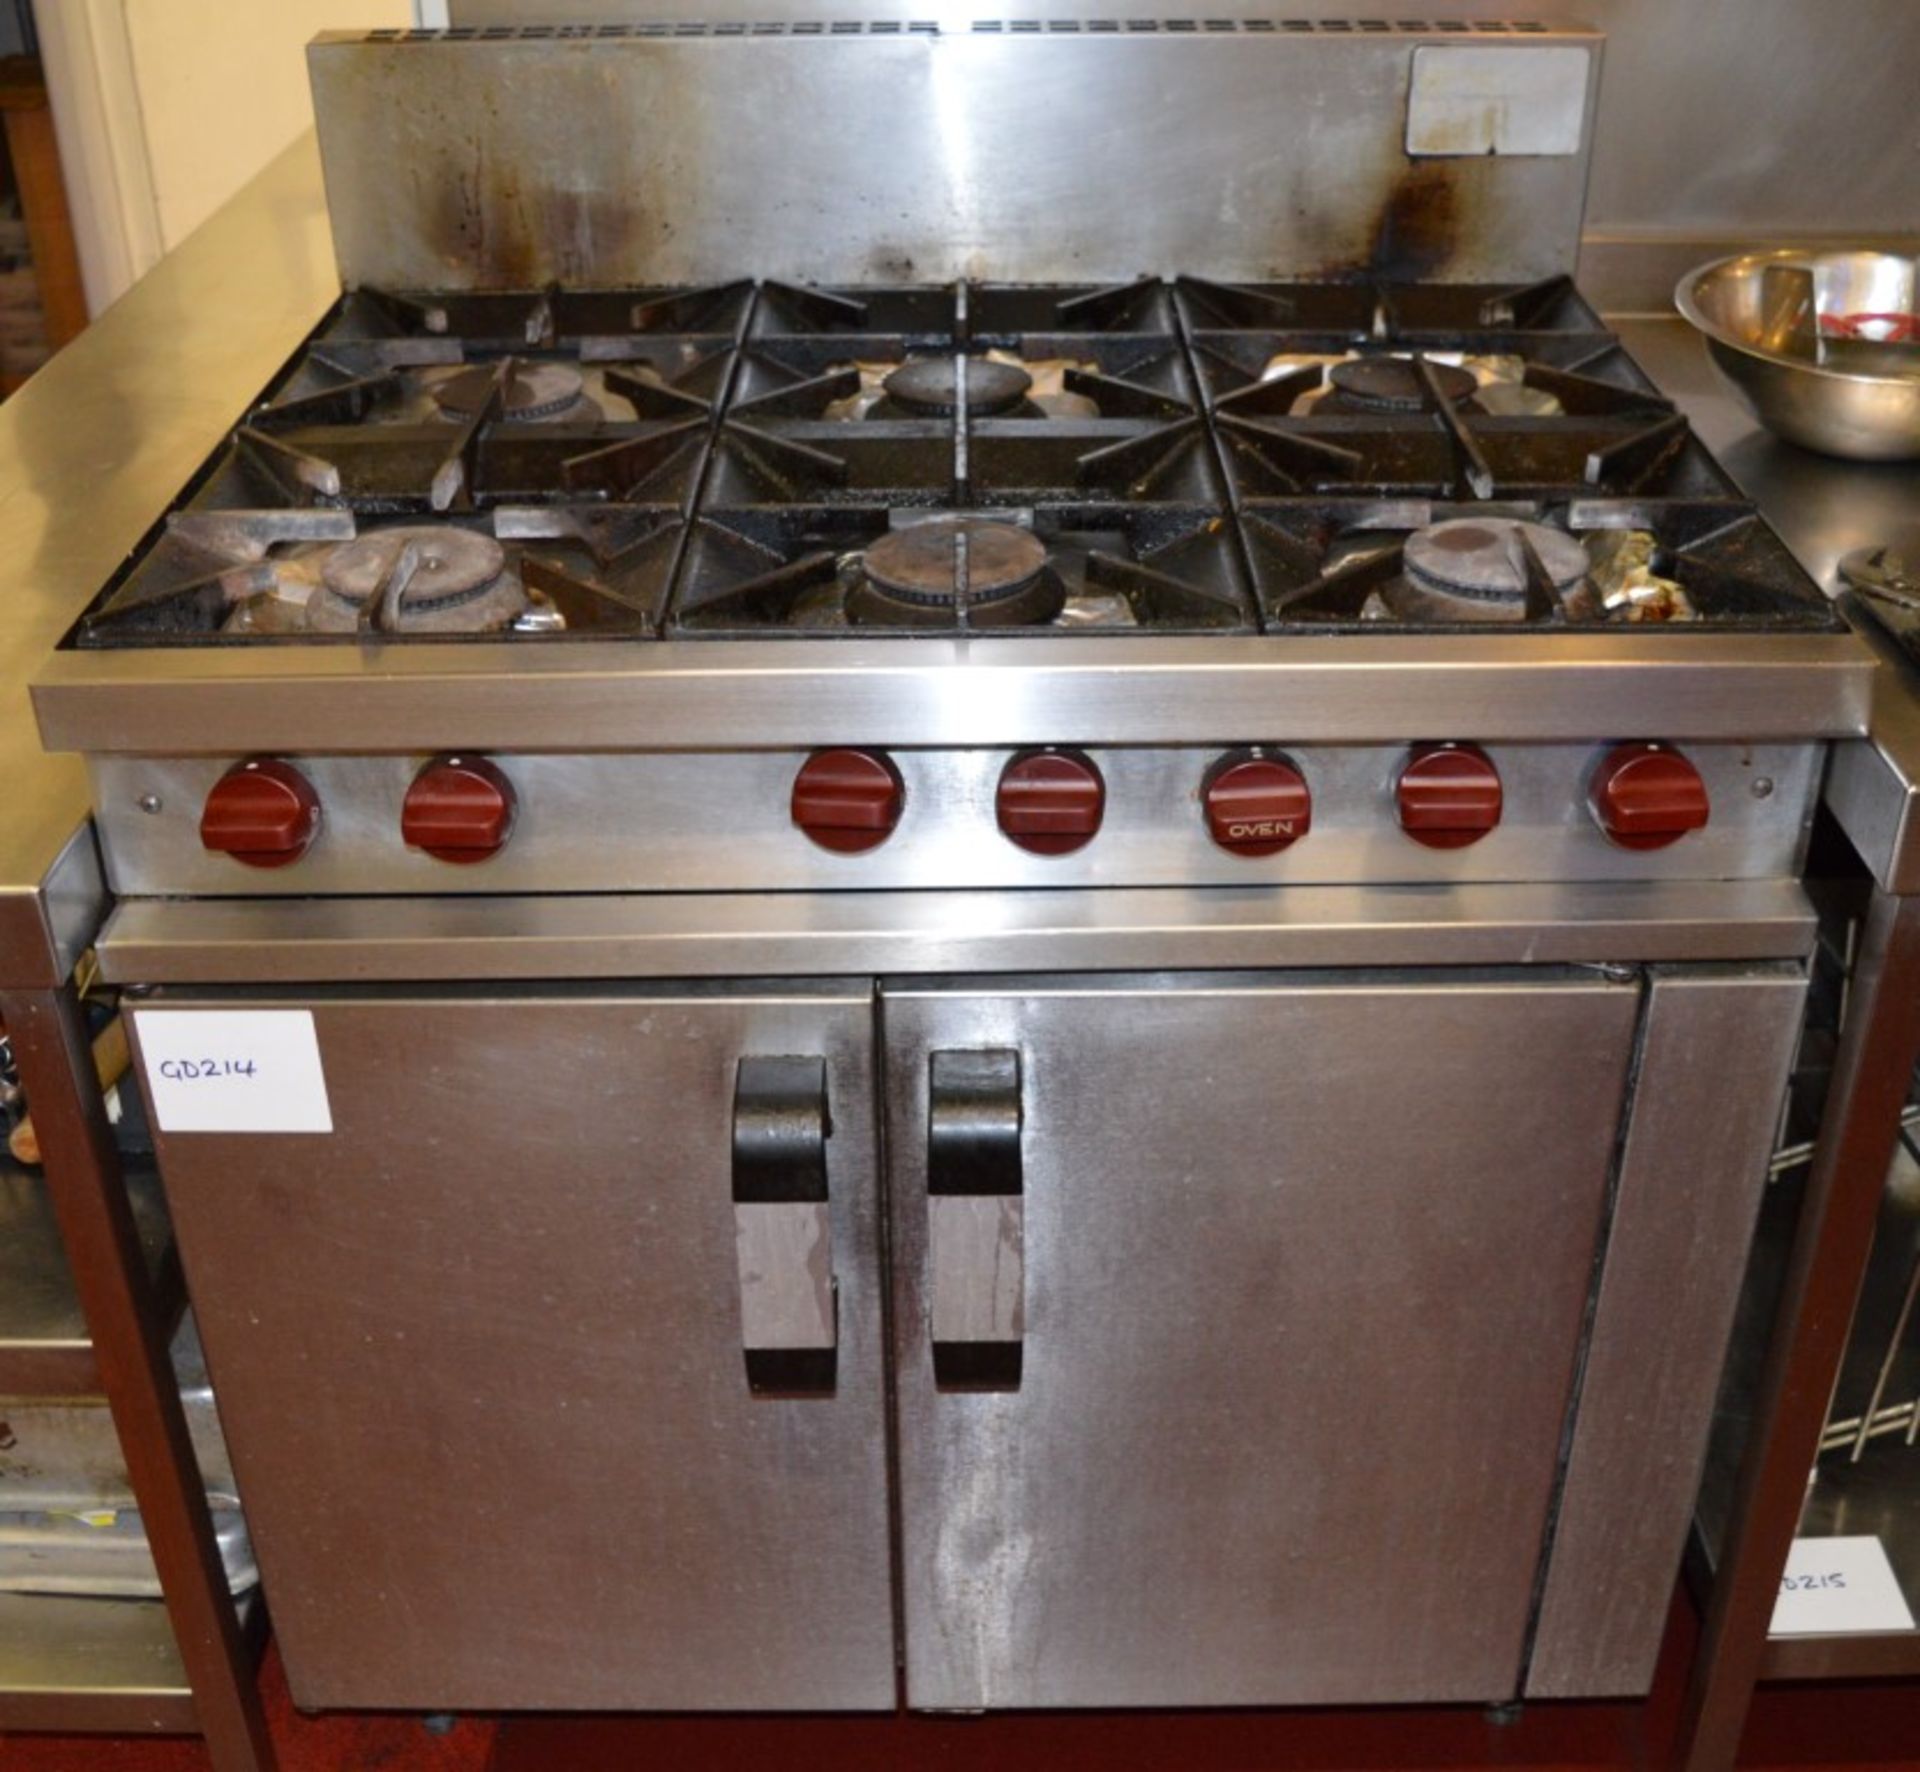 1 x Falcon 6 Burner Commercial Gas Cooker and Oven - Stainless Steel Commercial Kitchen